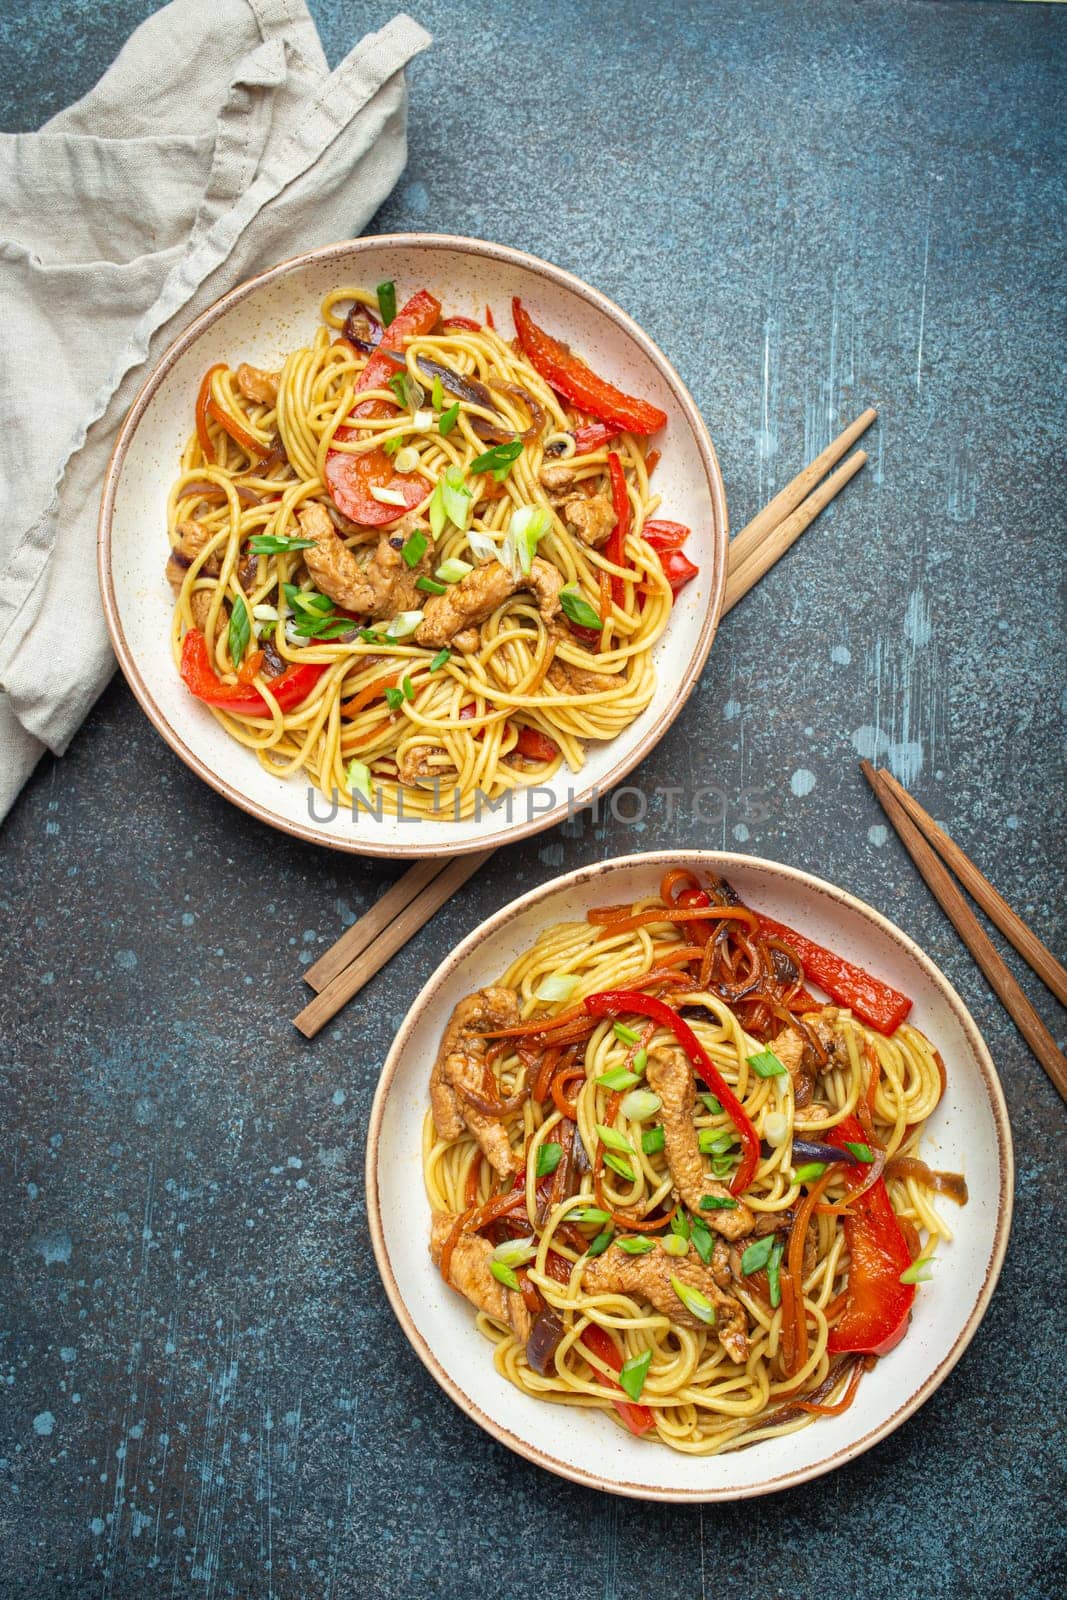 Two bowls with Chow Mein or Lo Mein, traditional Chinese stir fry noodles with meat and vegetables, served with chopsticks top view on rustic blue concrete background.